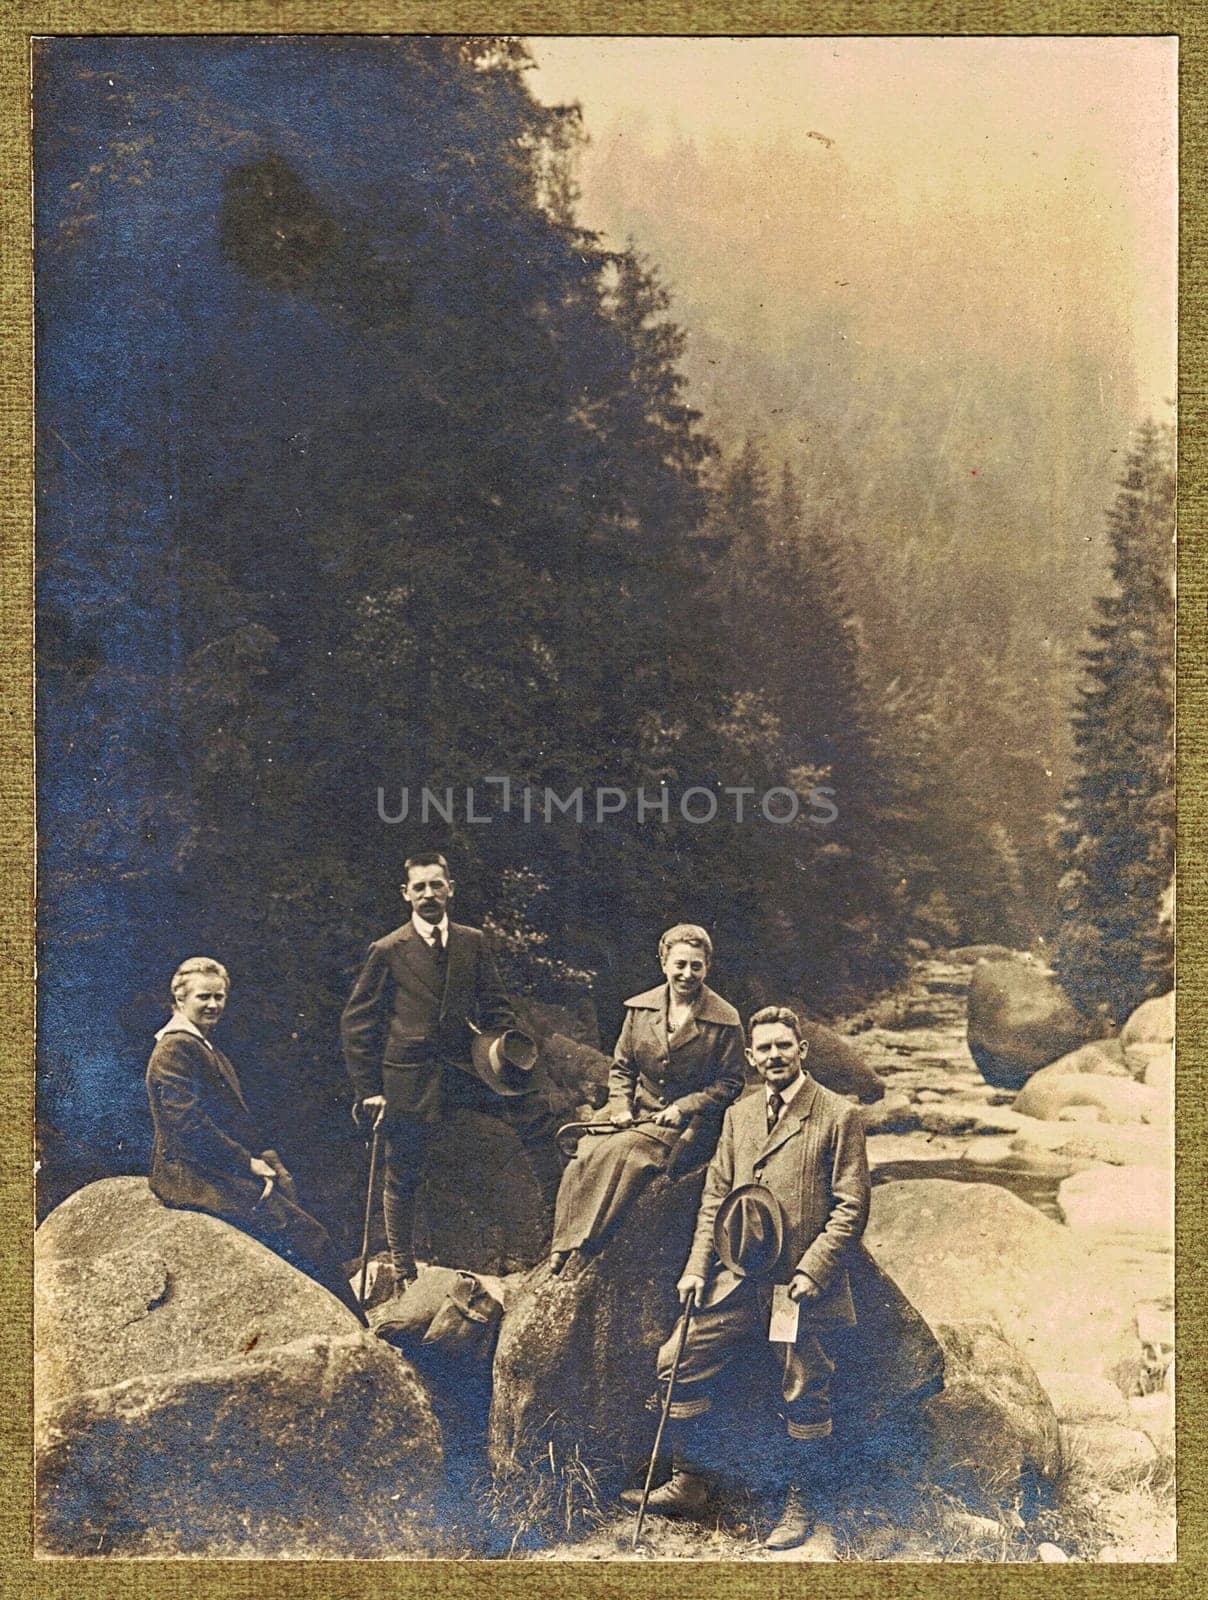 Vintage photo shows men and women pose outdor during for a walk in the mountains. Antique black and white studio portrait. by roman_nerud